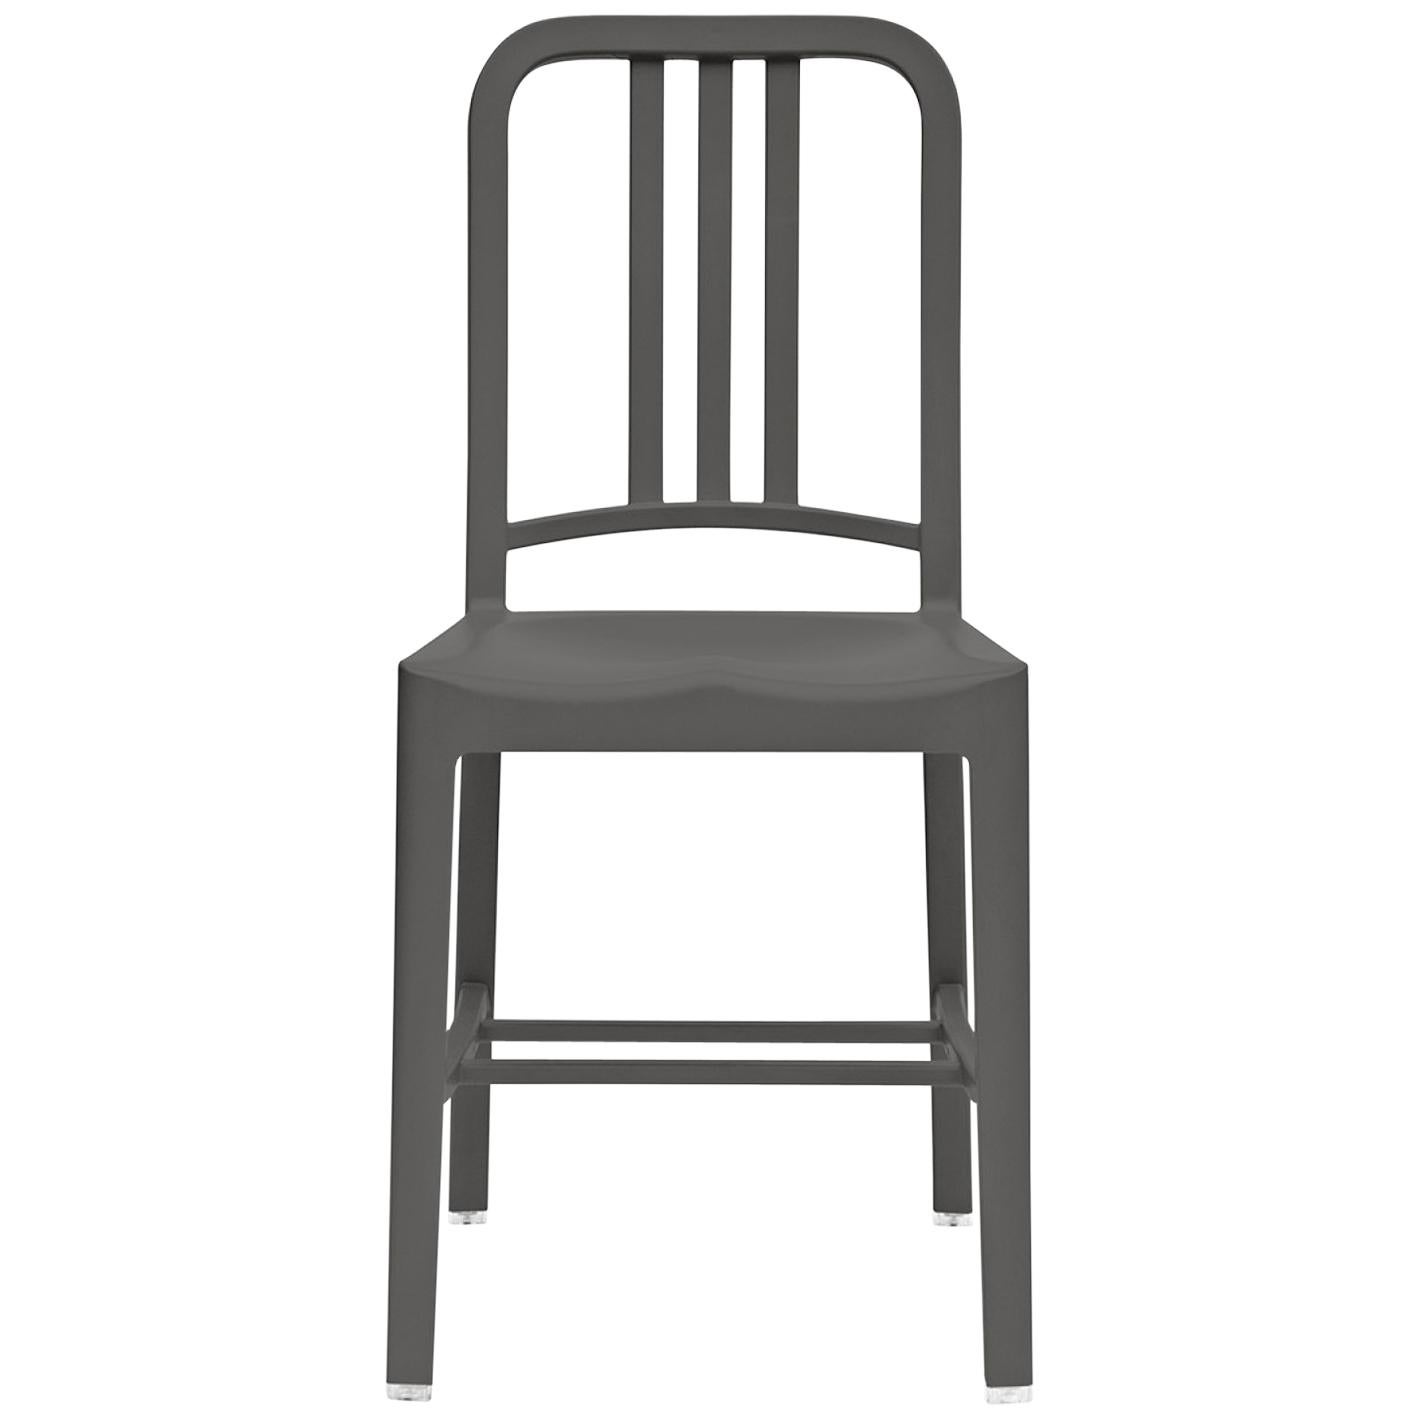 Emeco 111 Navy Chair in Charcoal by Coca-Cola For Sale